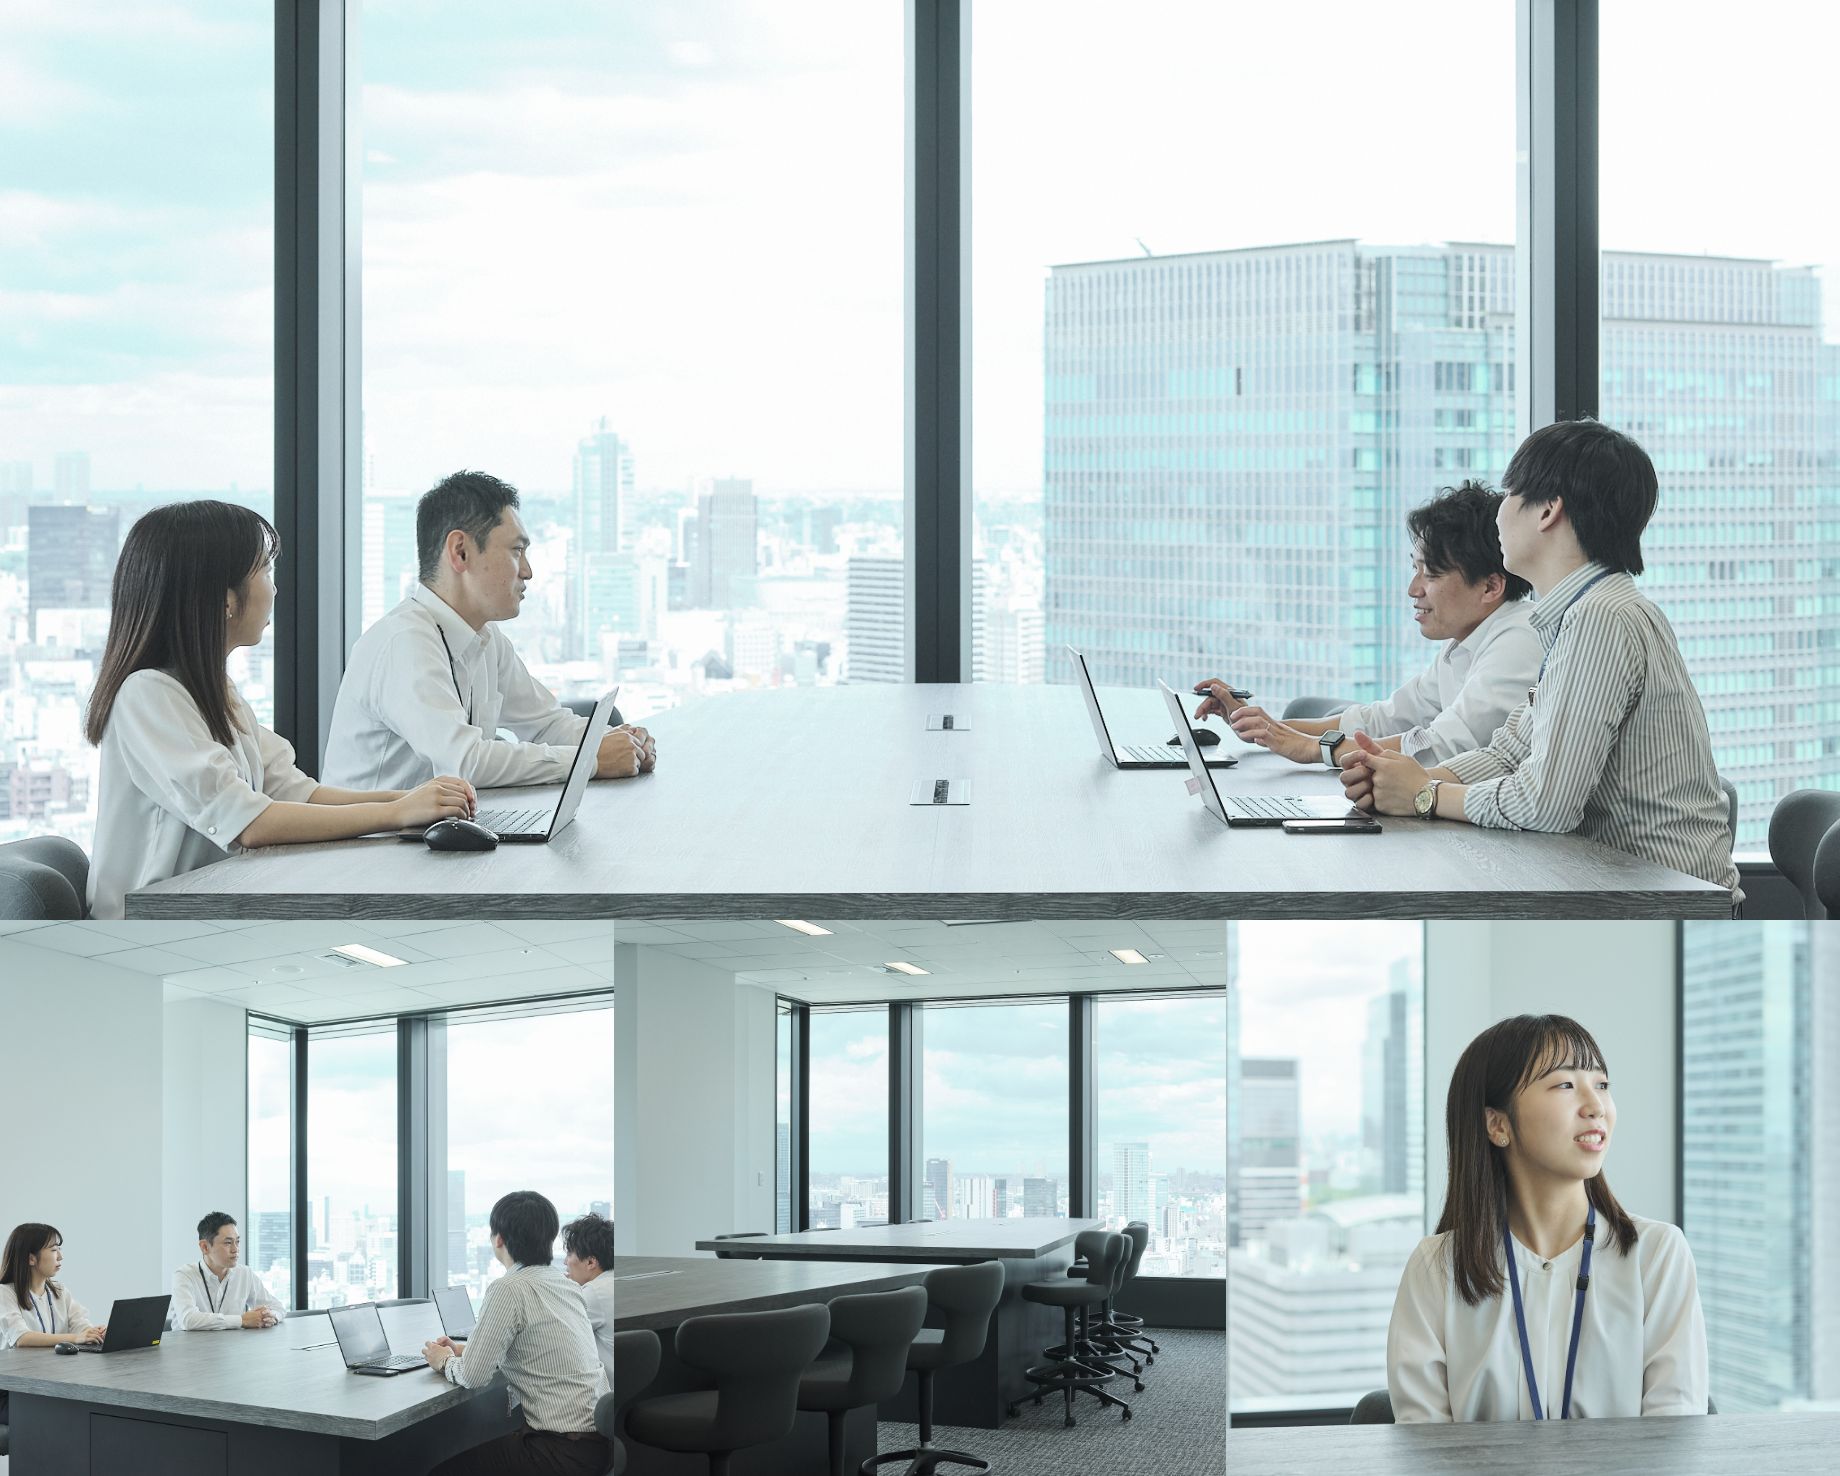 Yoshimura: “The conference room is bright and open, with light coming in through the large dual-paned windows.”